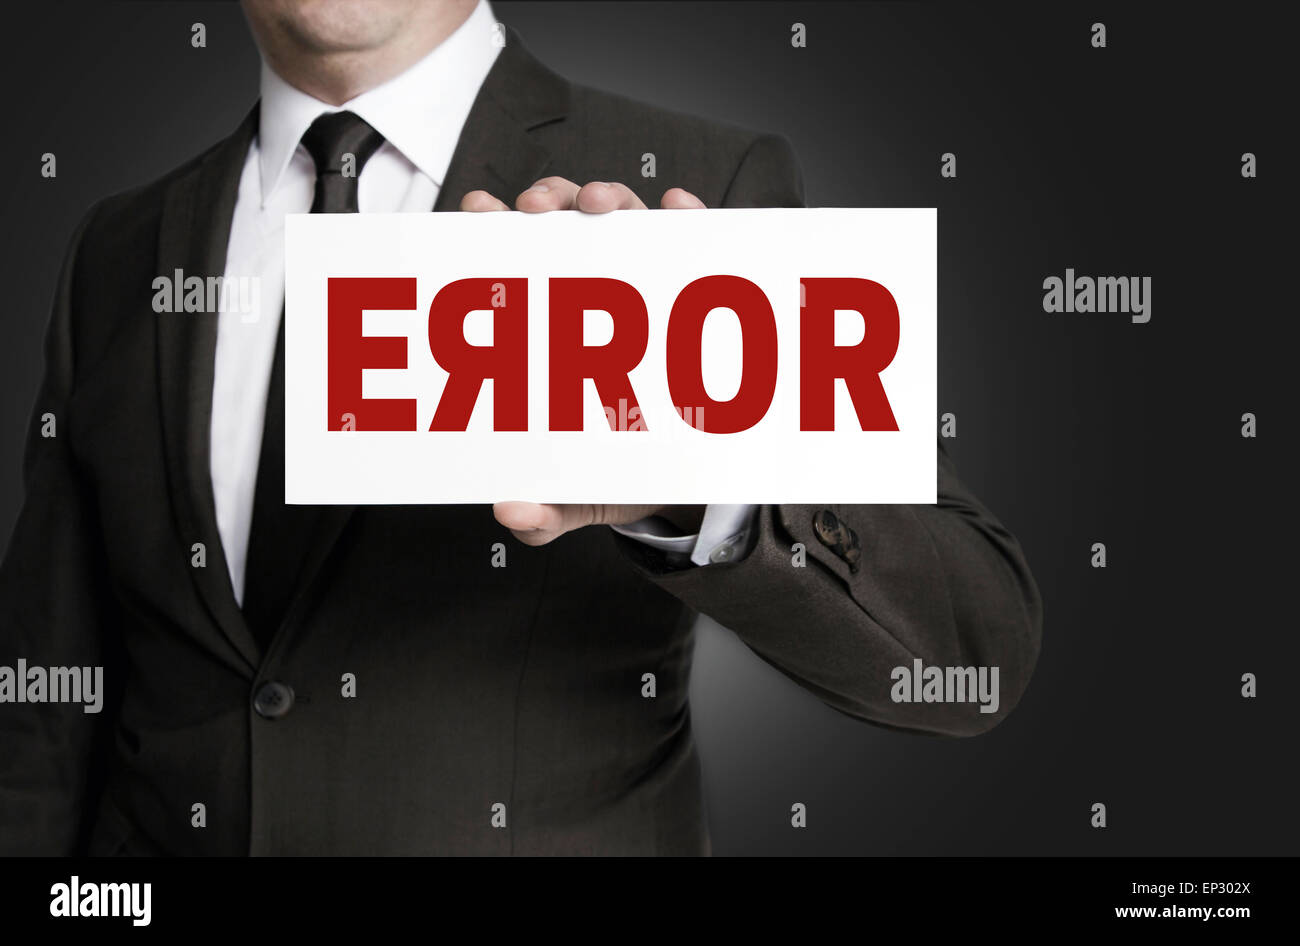 Error sign held by businessman. Stock Photo